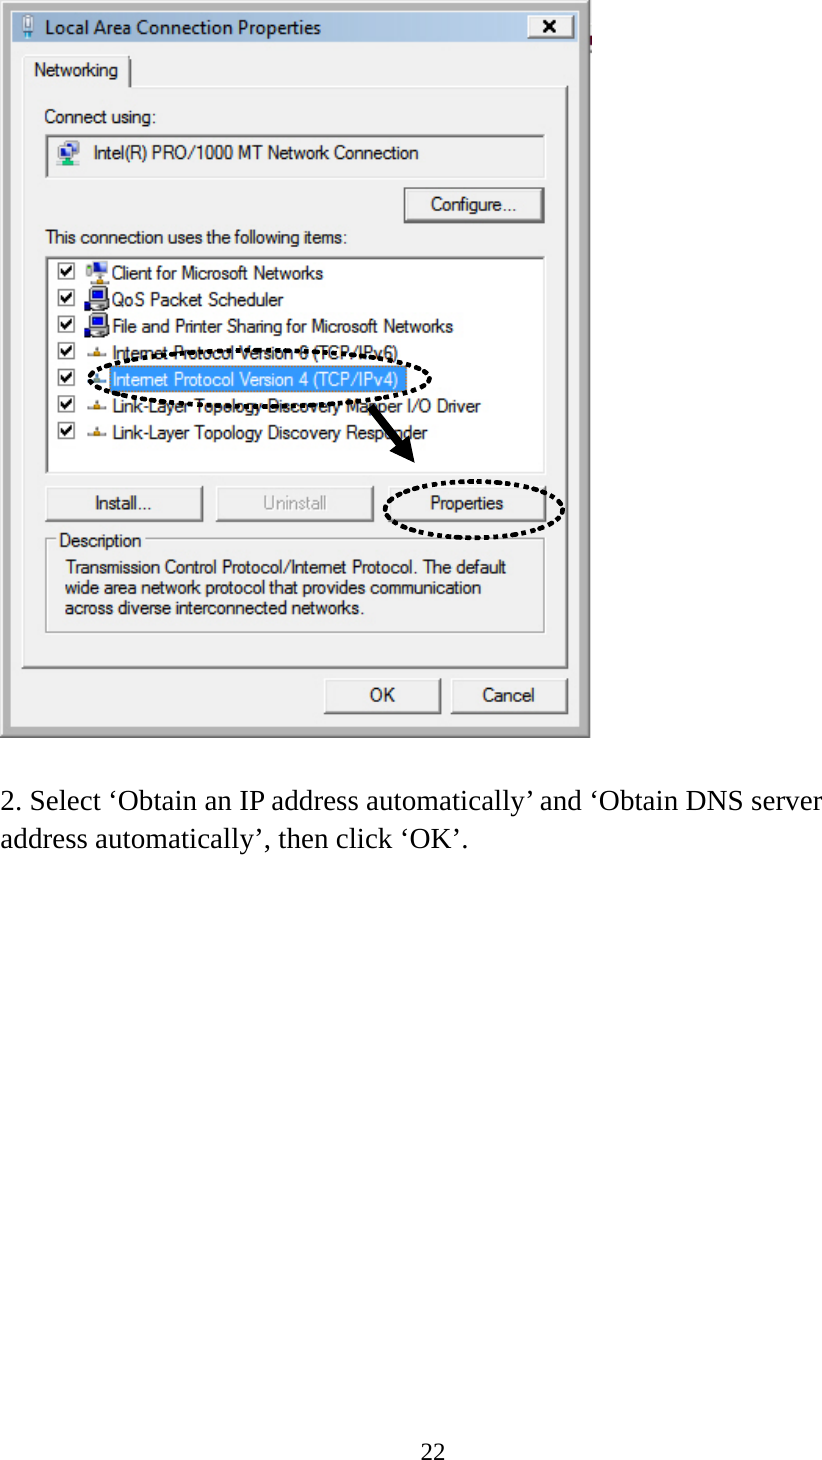 22    2. Select ‘Obtain an IP address automatically’ and ‘Obtain DNS server address automatically’, then click ‘OK’.  